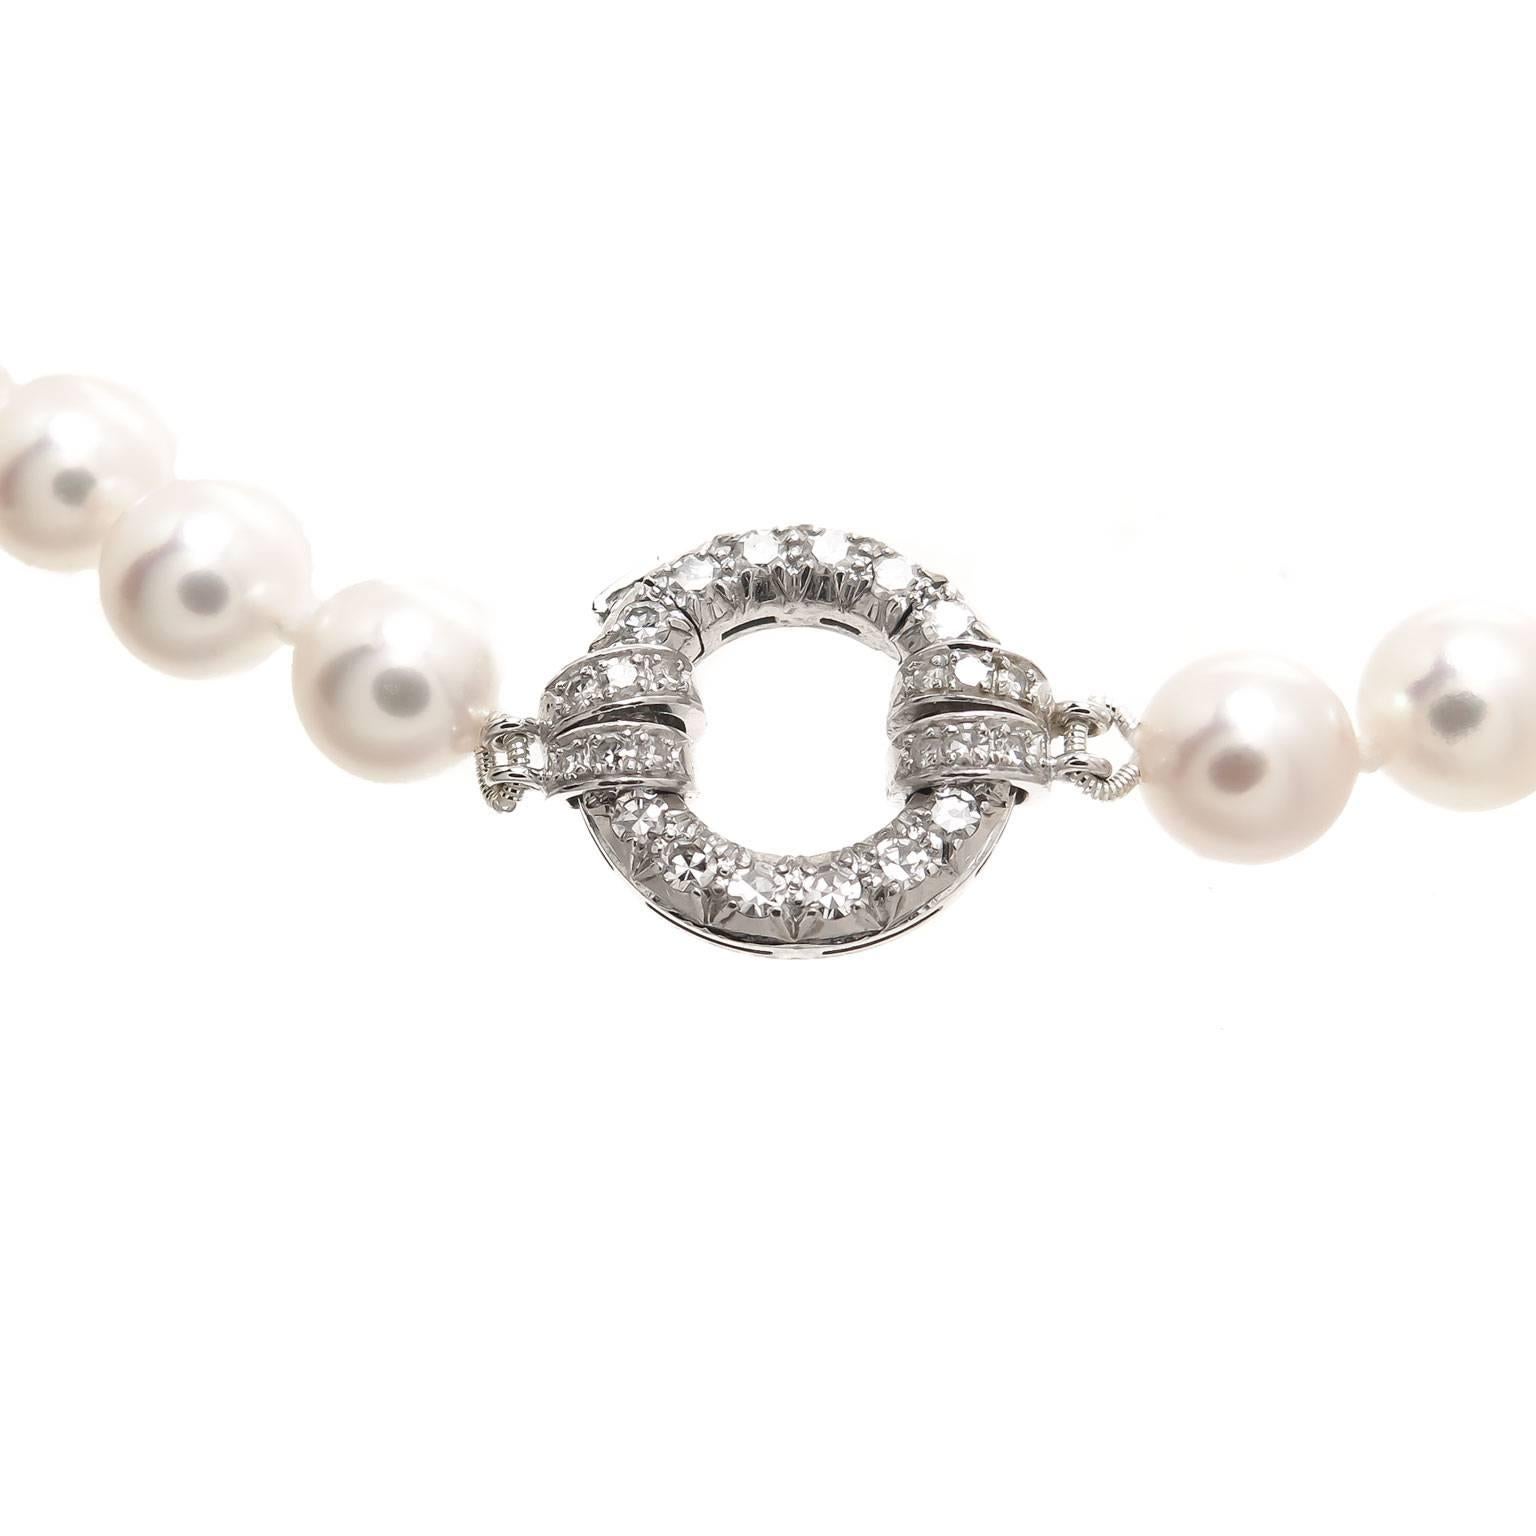 Circa 2000 Vacheron & Constantin, Geneve 36 Inch Pearl Necklace. 7.5 MM round individually knotted, Fine White luster with a light Pink hue, Diamond set 18K white Gold Clasp. Comes in Original Vacheron signed Suede Holder. Excellent condition,